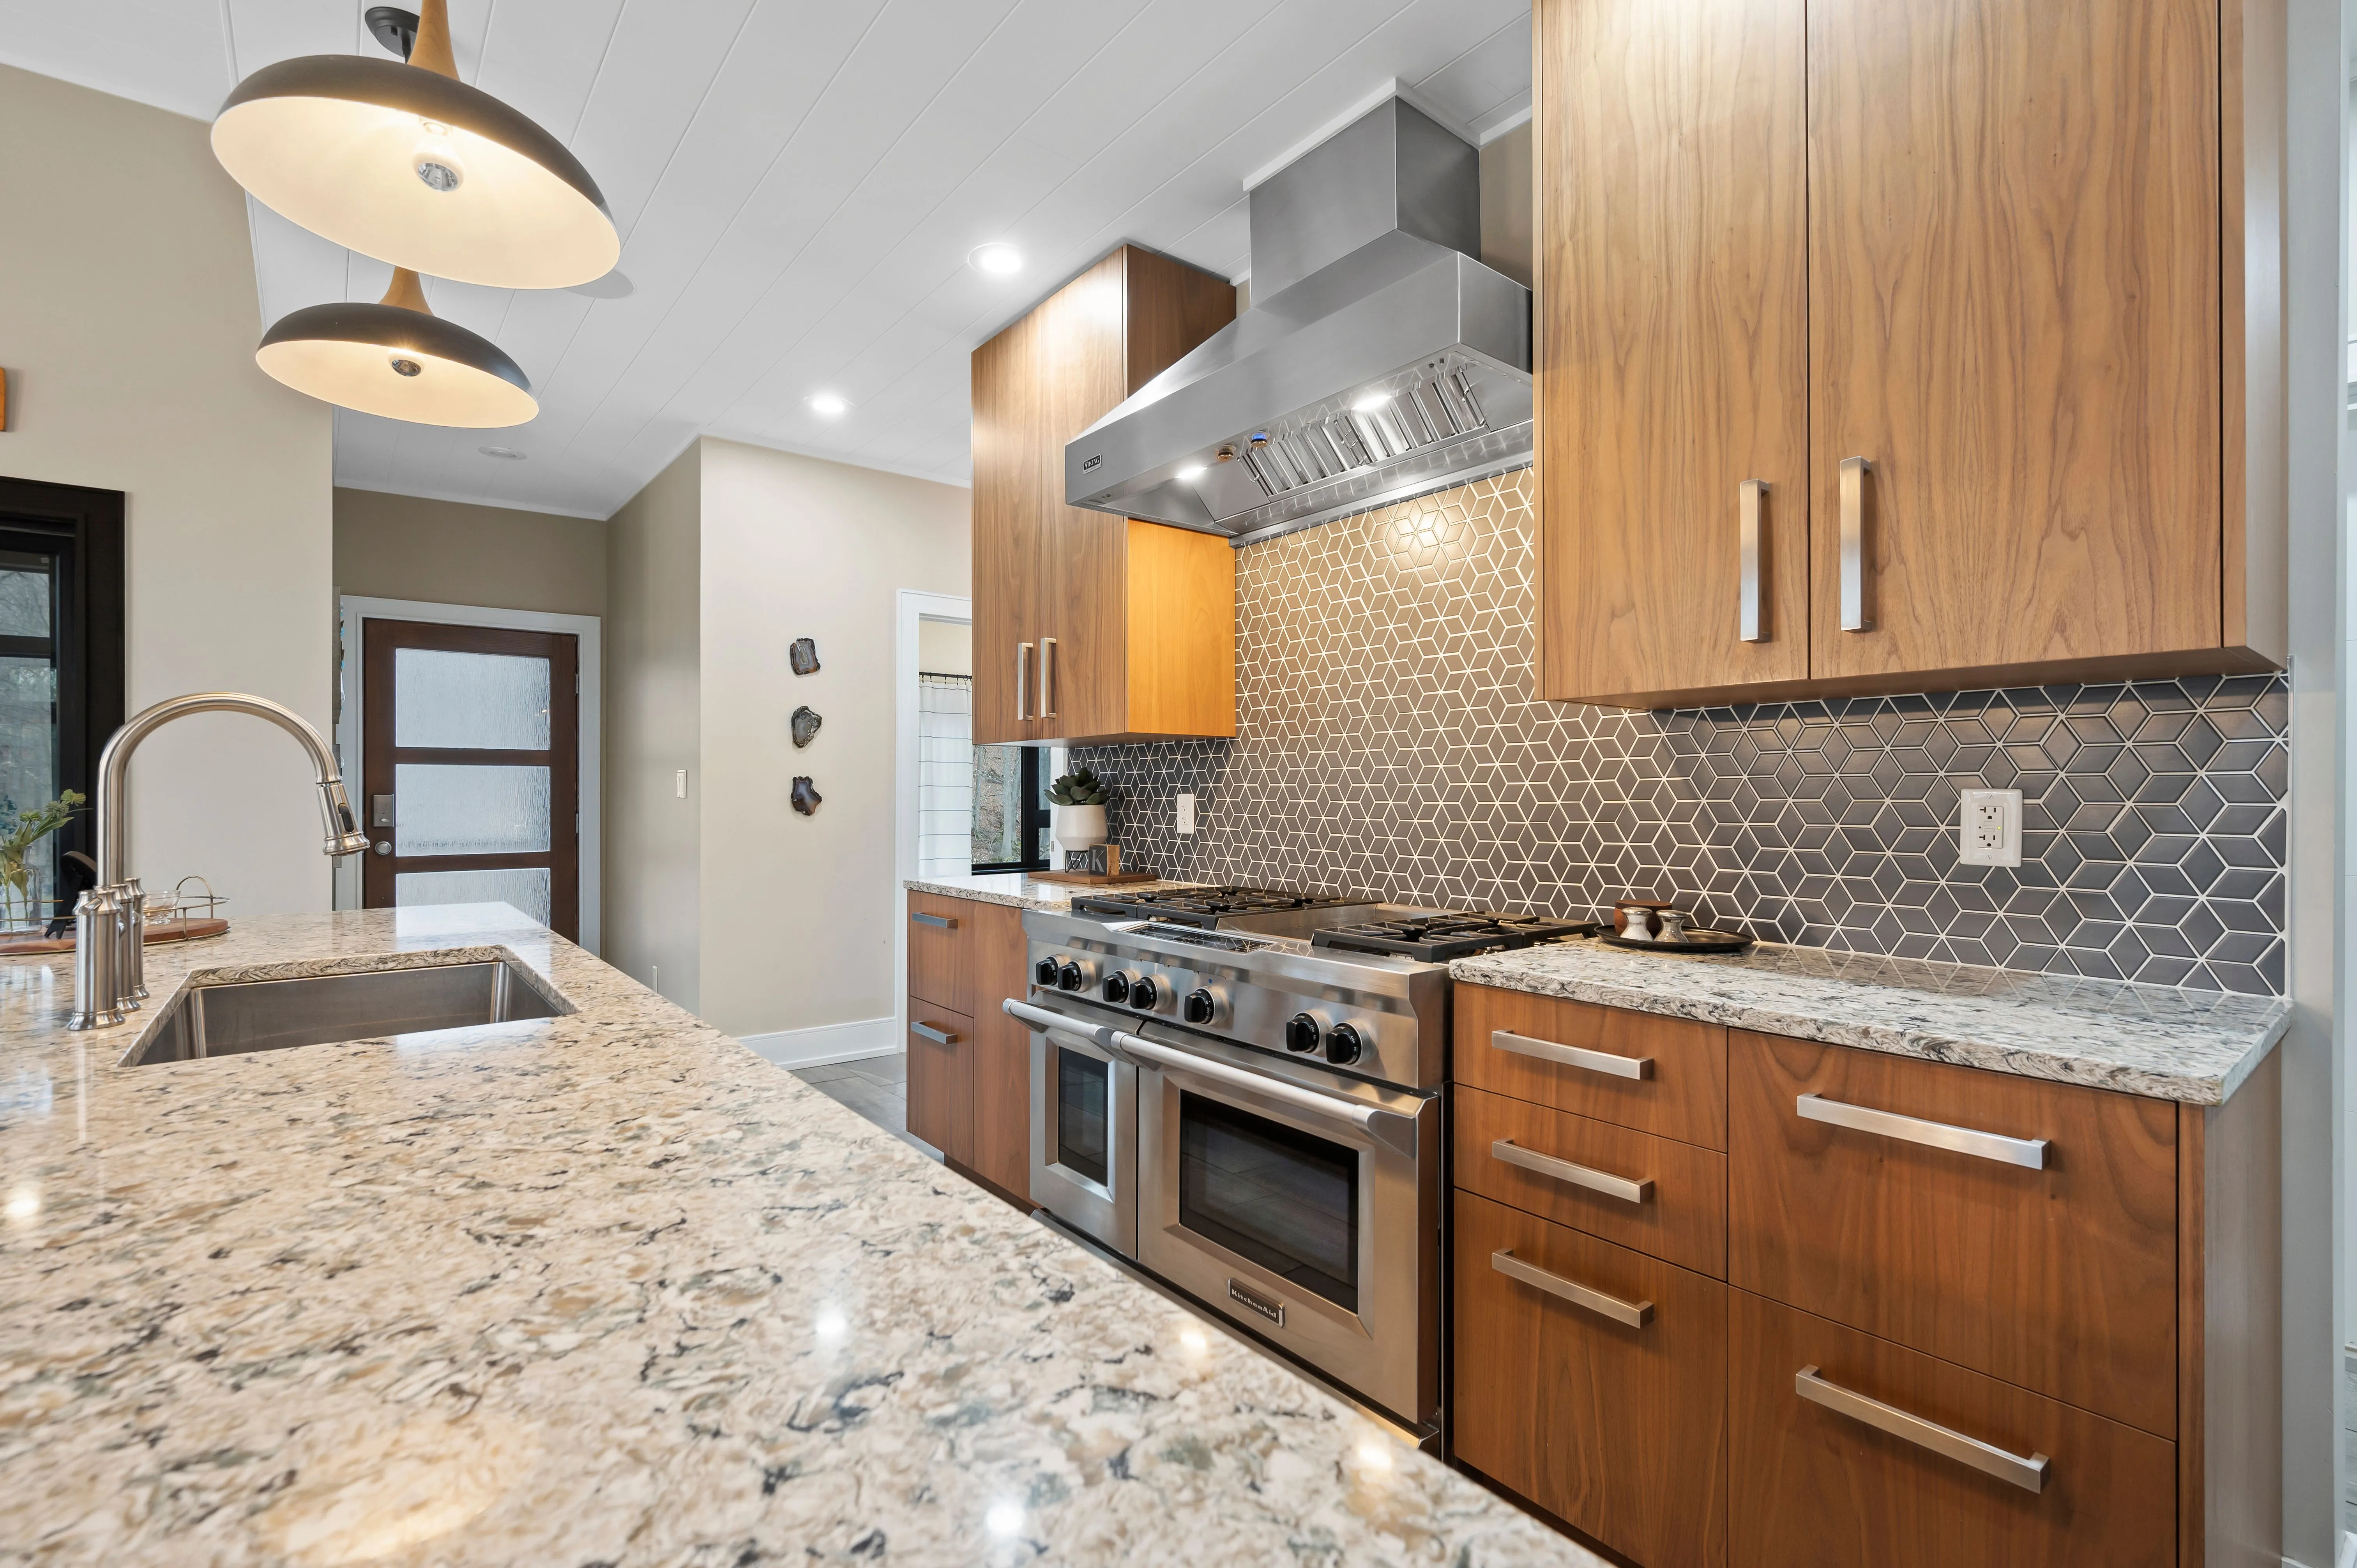 Modern kitchen interior with wood cabinets, granite countertops, and stainless steel appliances.